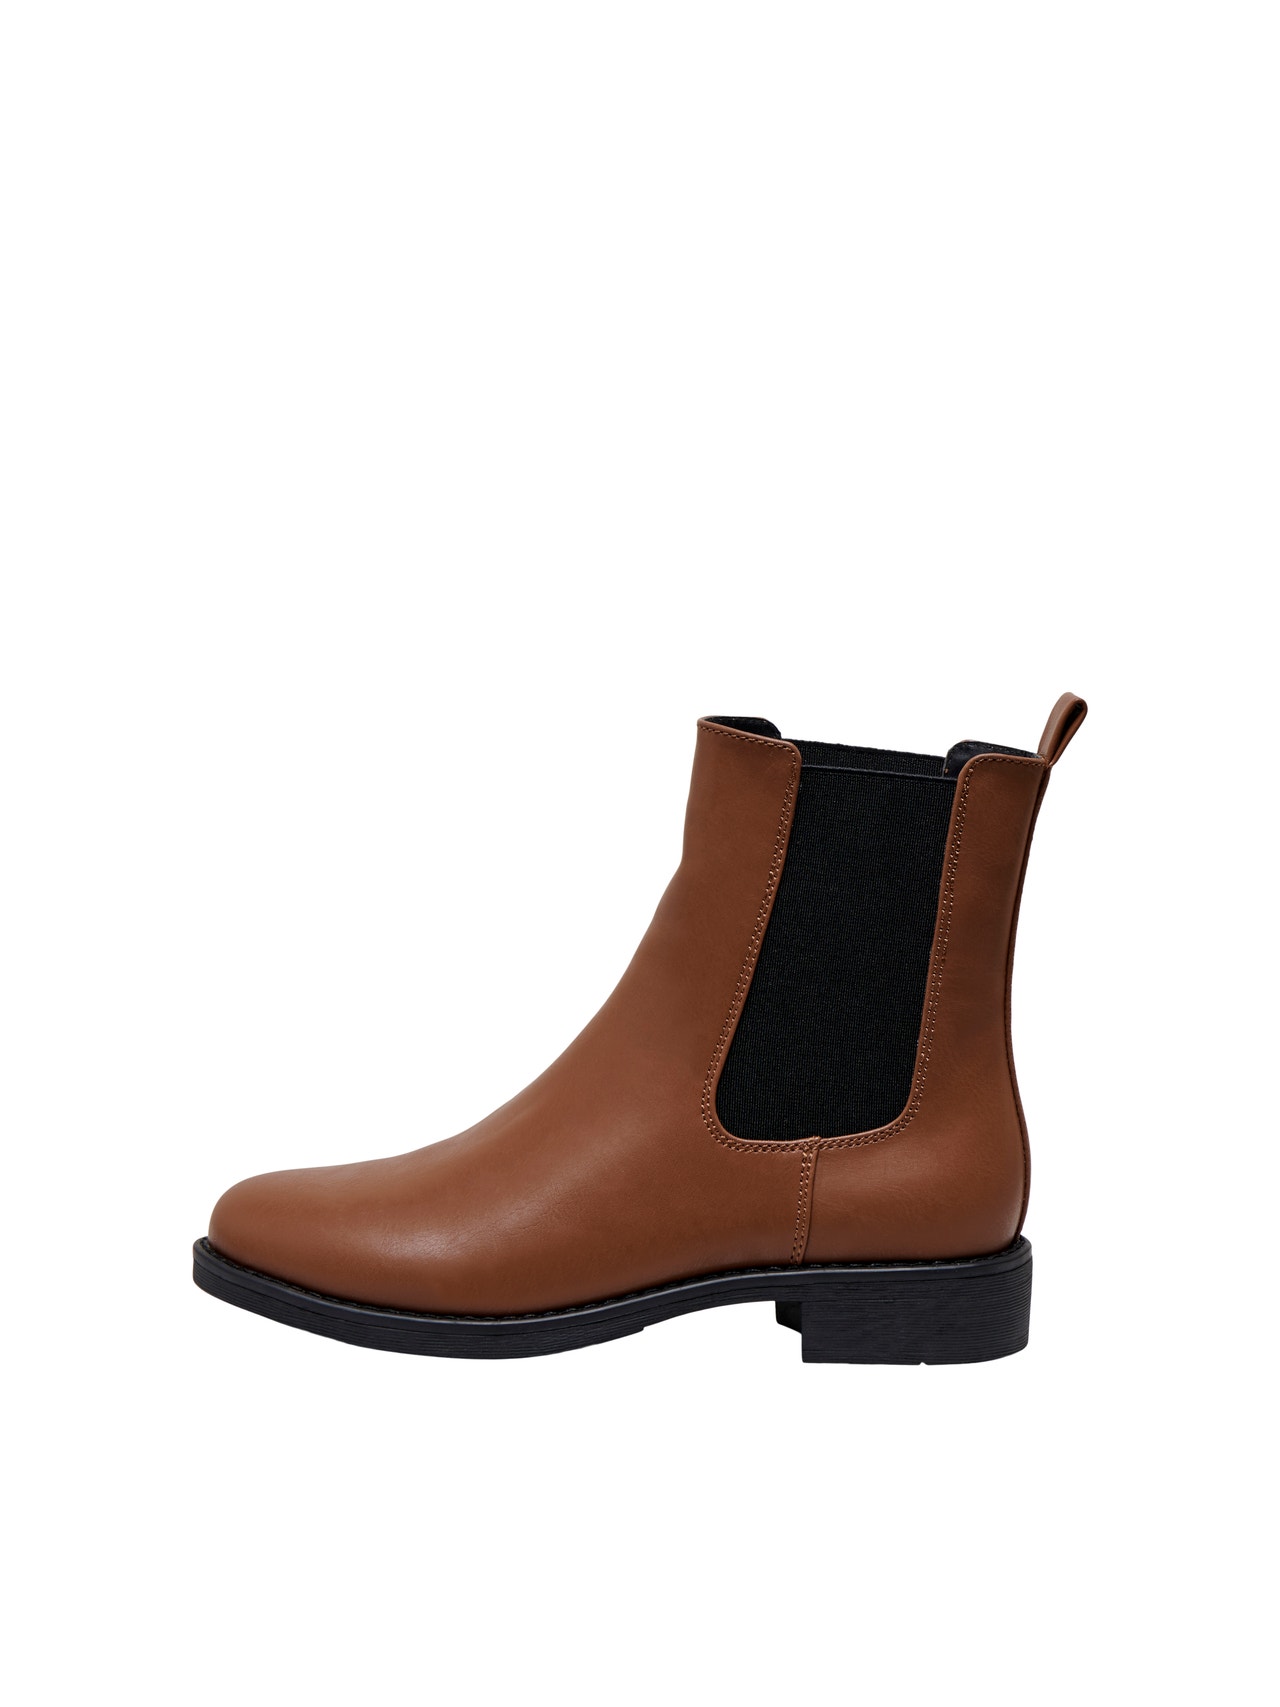 ONLY Almond toe Boots -Brown Stone - 15304990